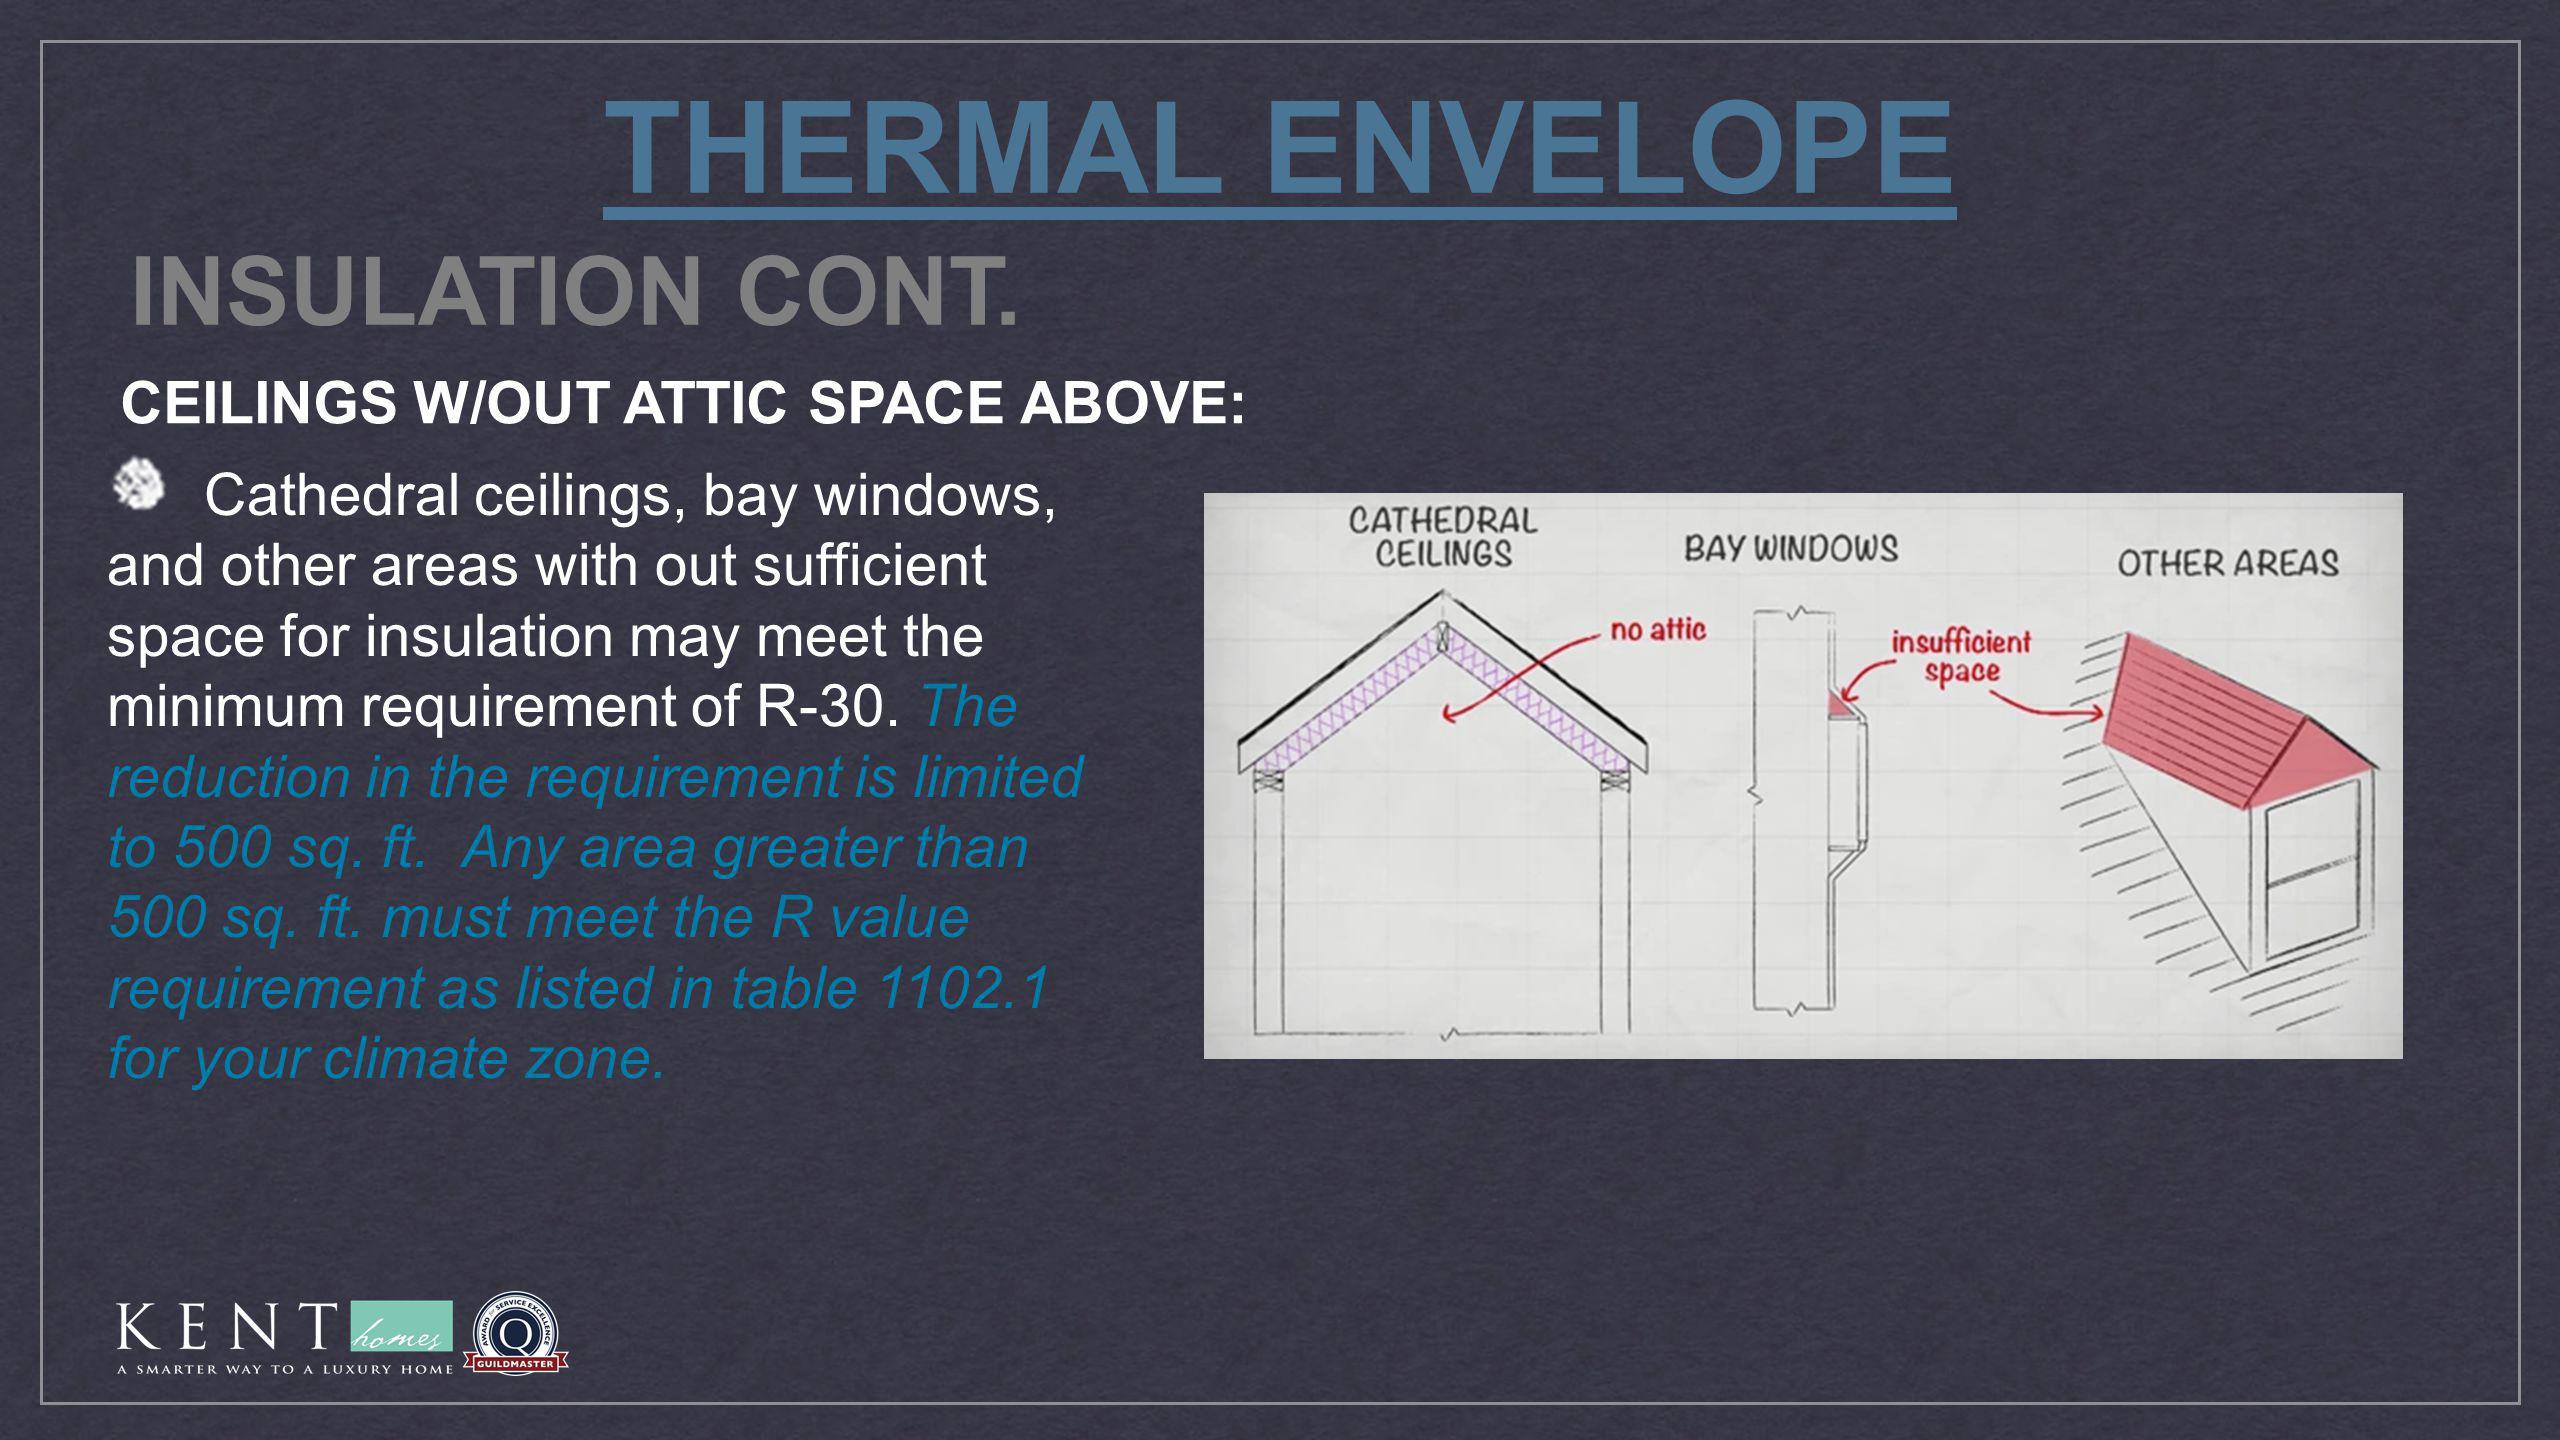 THERMAL ENVELOPE Cathedral ceilings, bay windows, and other areas with out sufficient space for insulation may meet the minimum requirement of R-30.